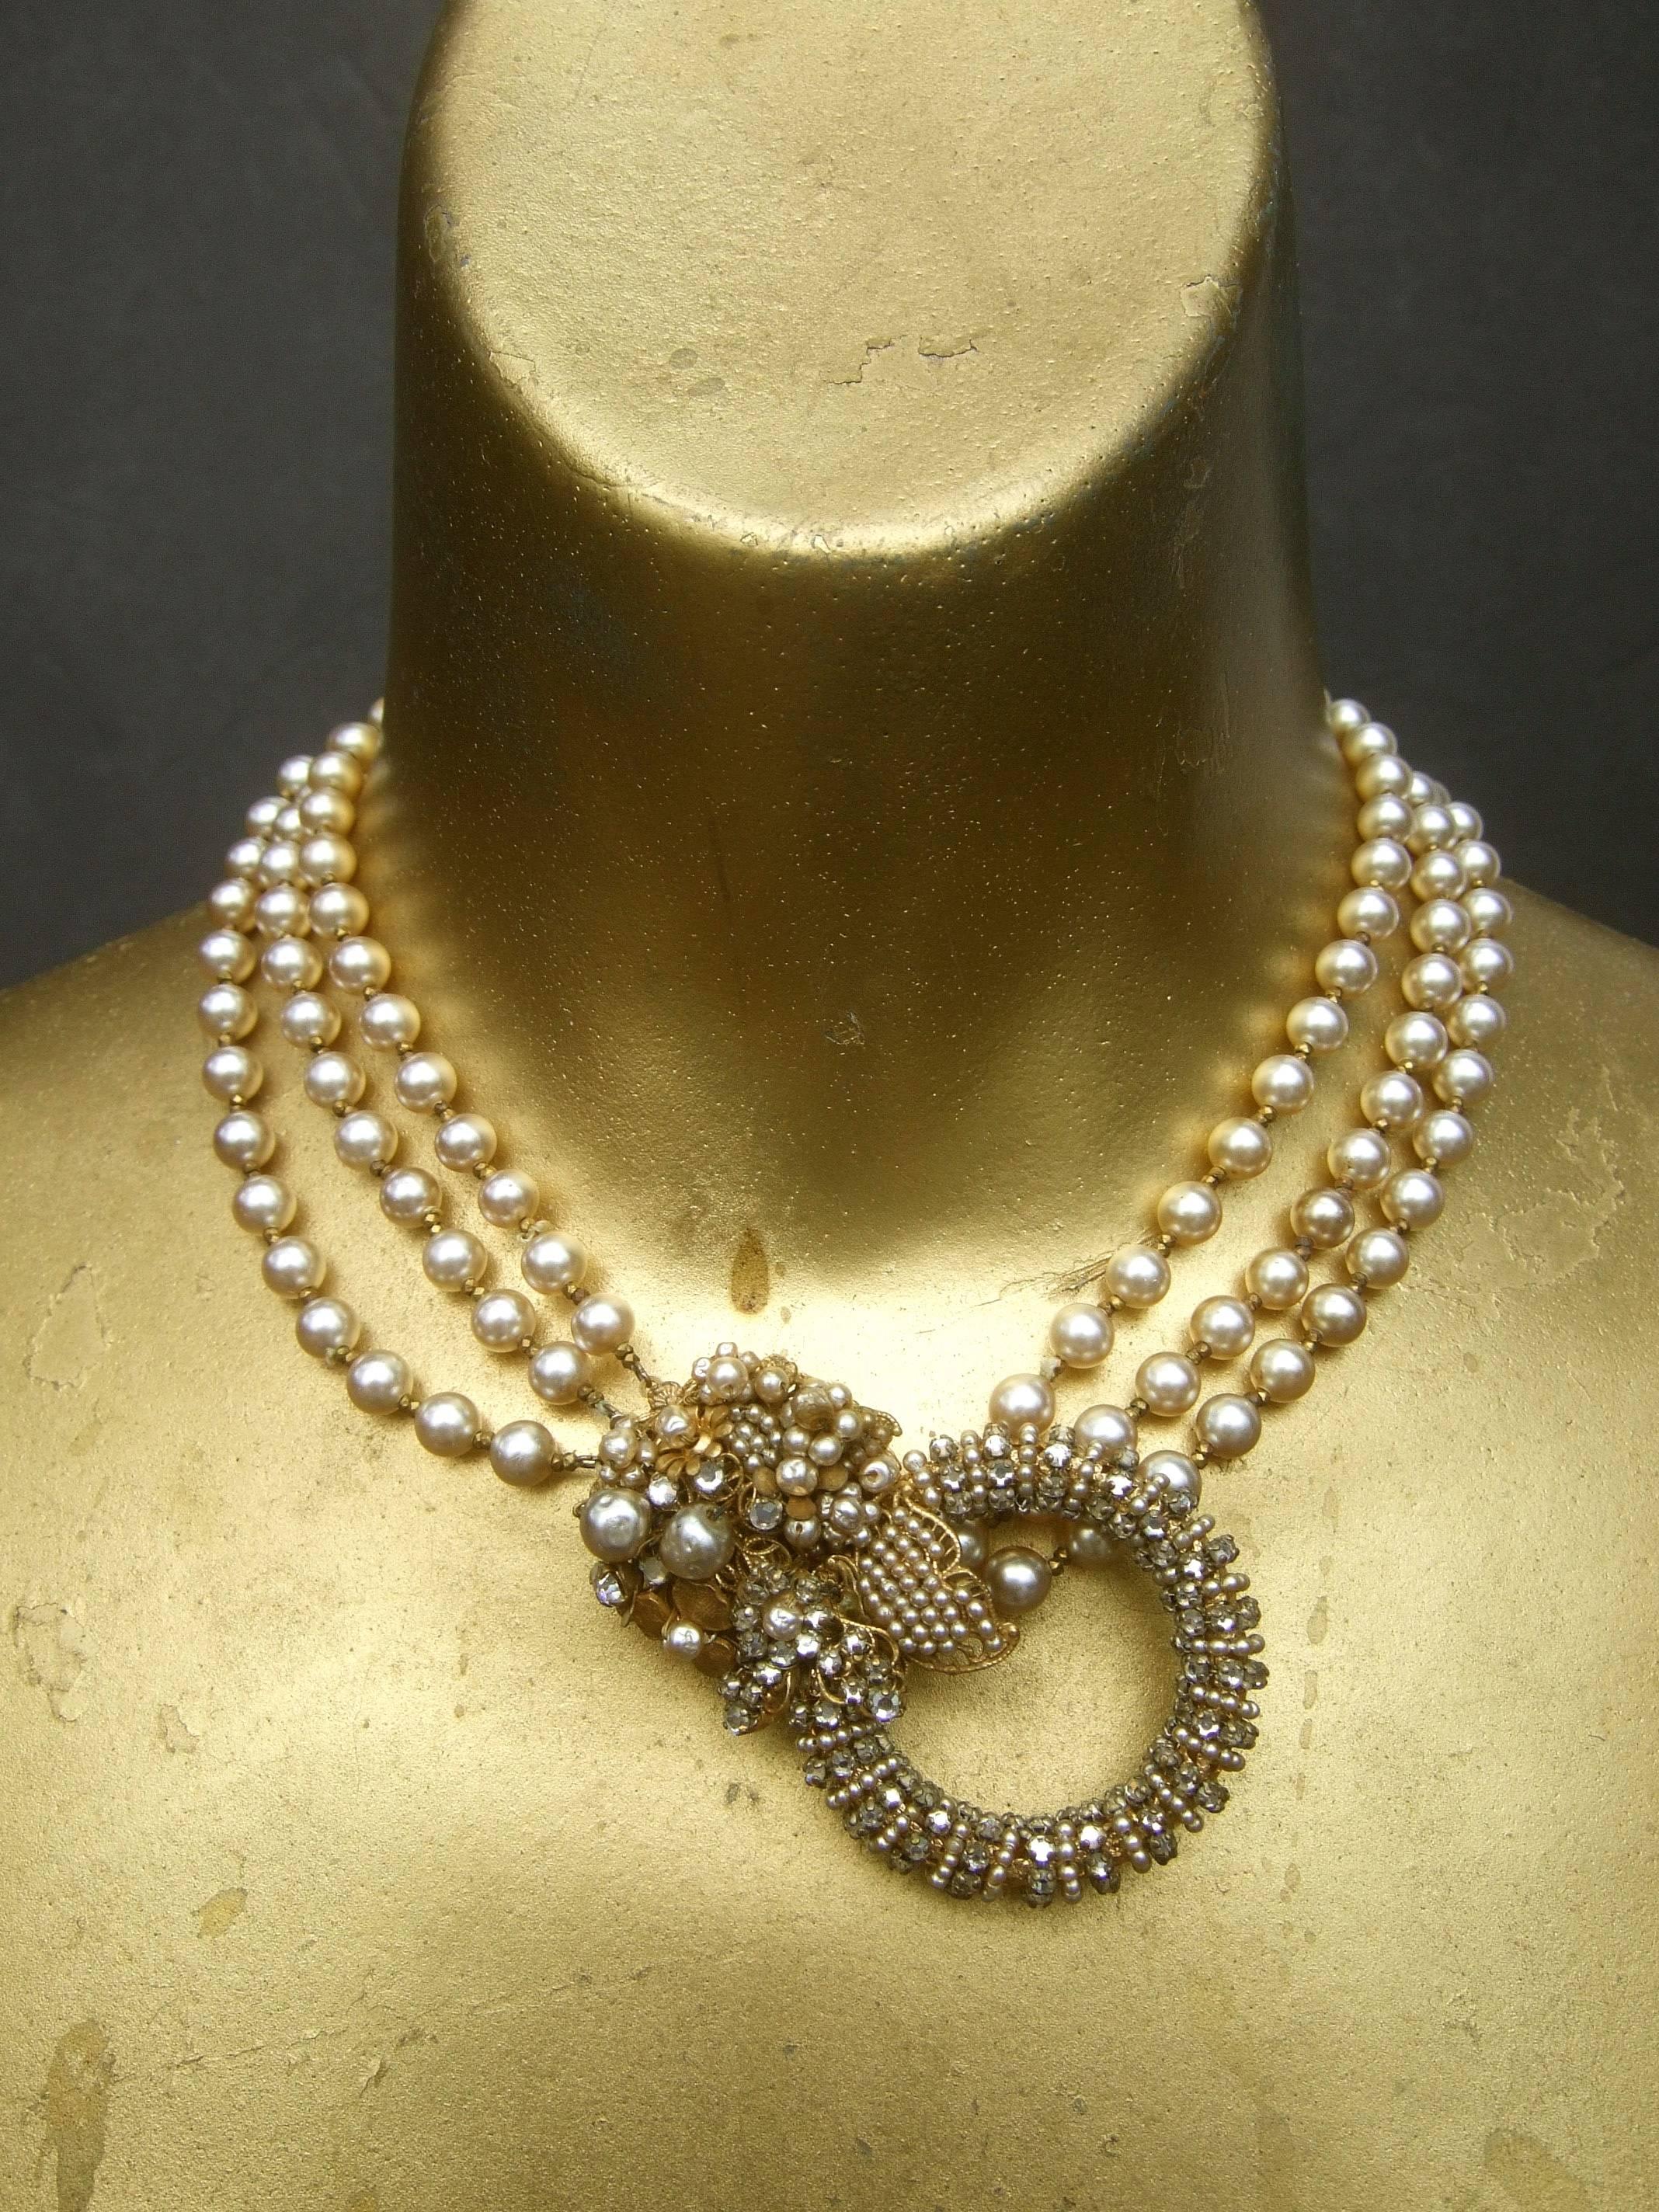 Women's Miriam Haskell Glass Pearl Choker Necklace circa 1950s